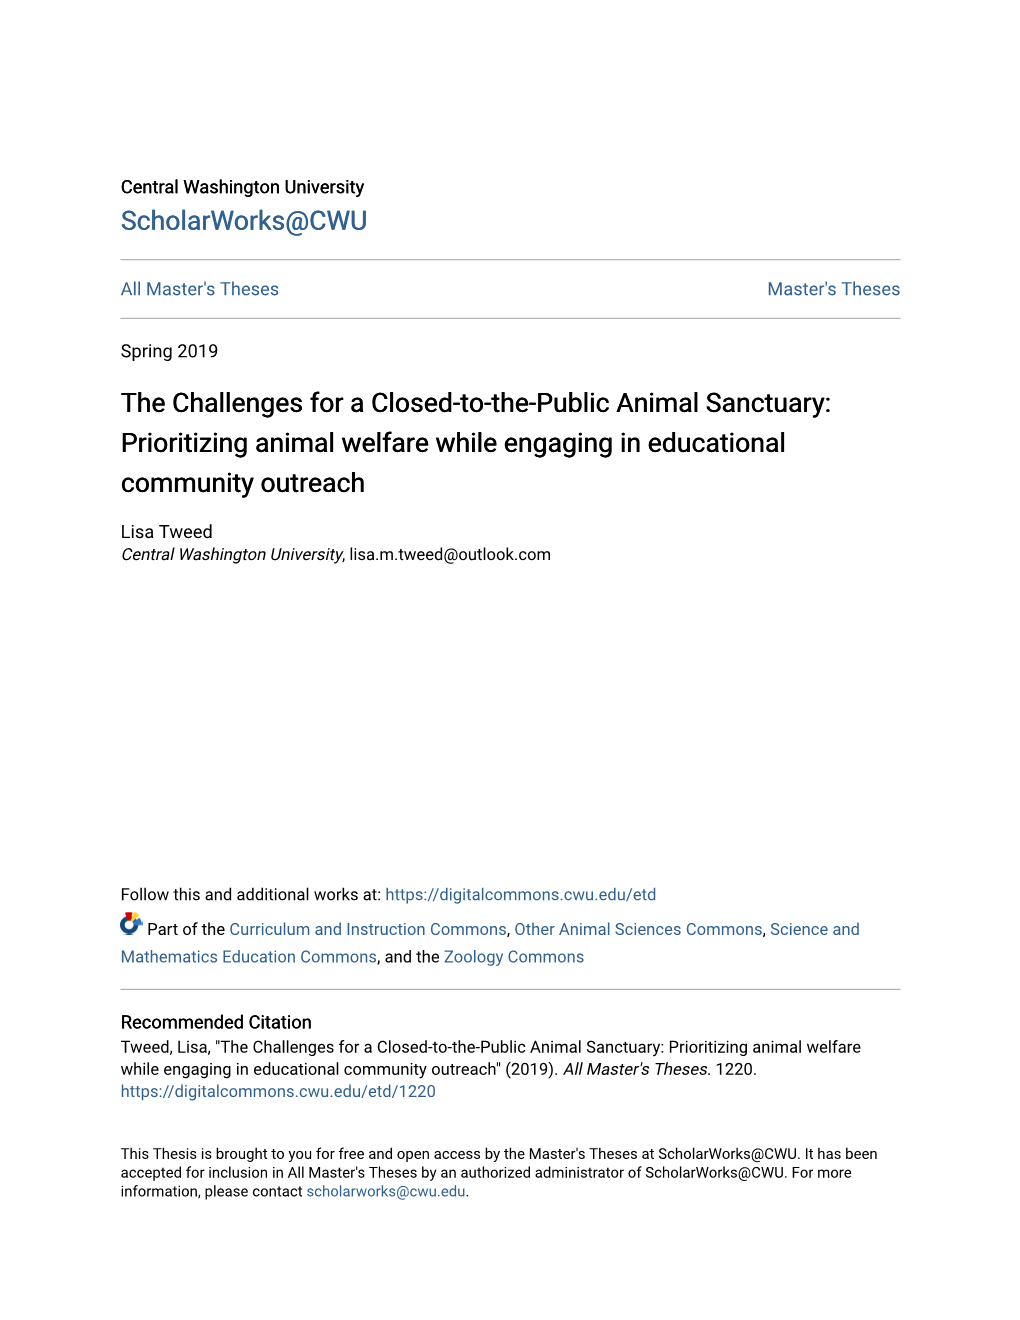 The Challenges for a Closed-To-The-Public Animal Sanctuary: Prioritizing Animal Welfare While Engaging in Educational Community Outreach